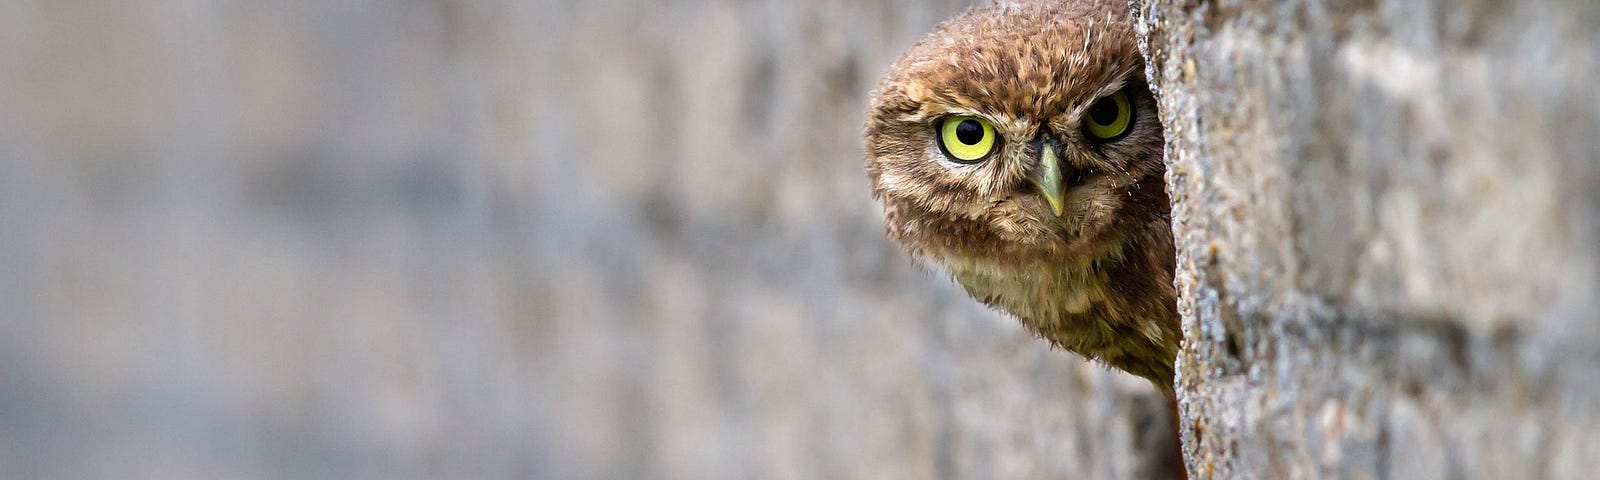 Image of a Little Owl peering out from behind part of a wall